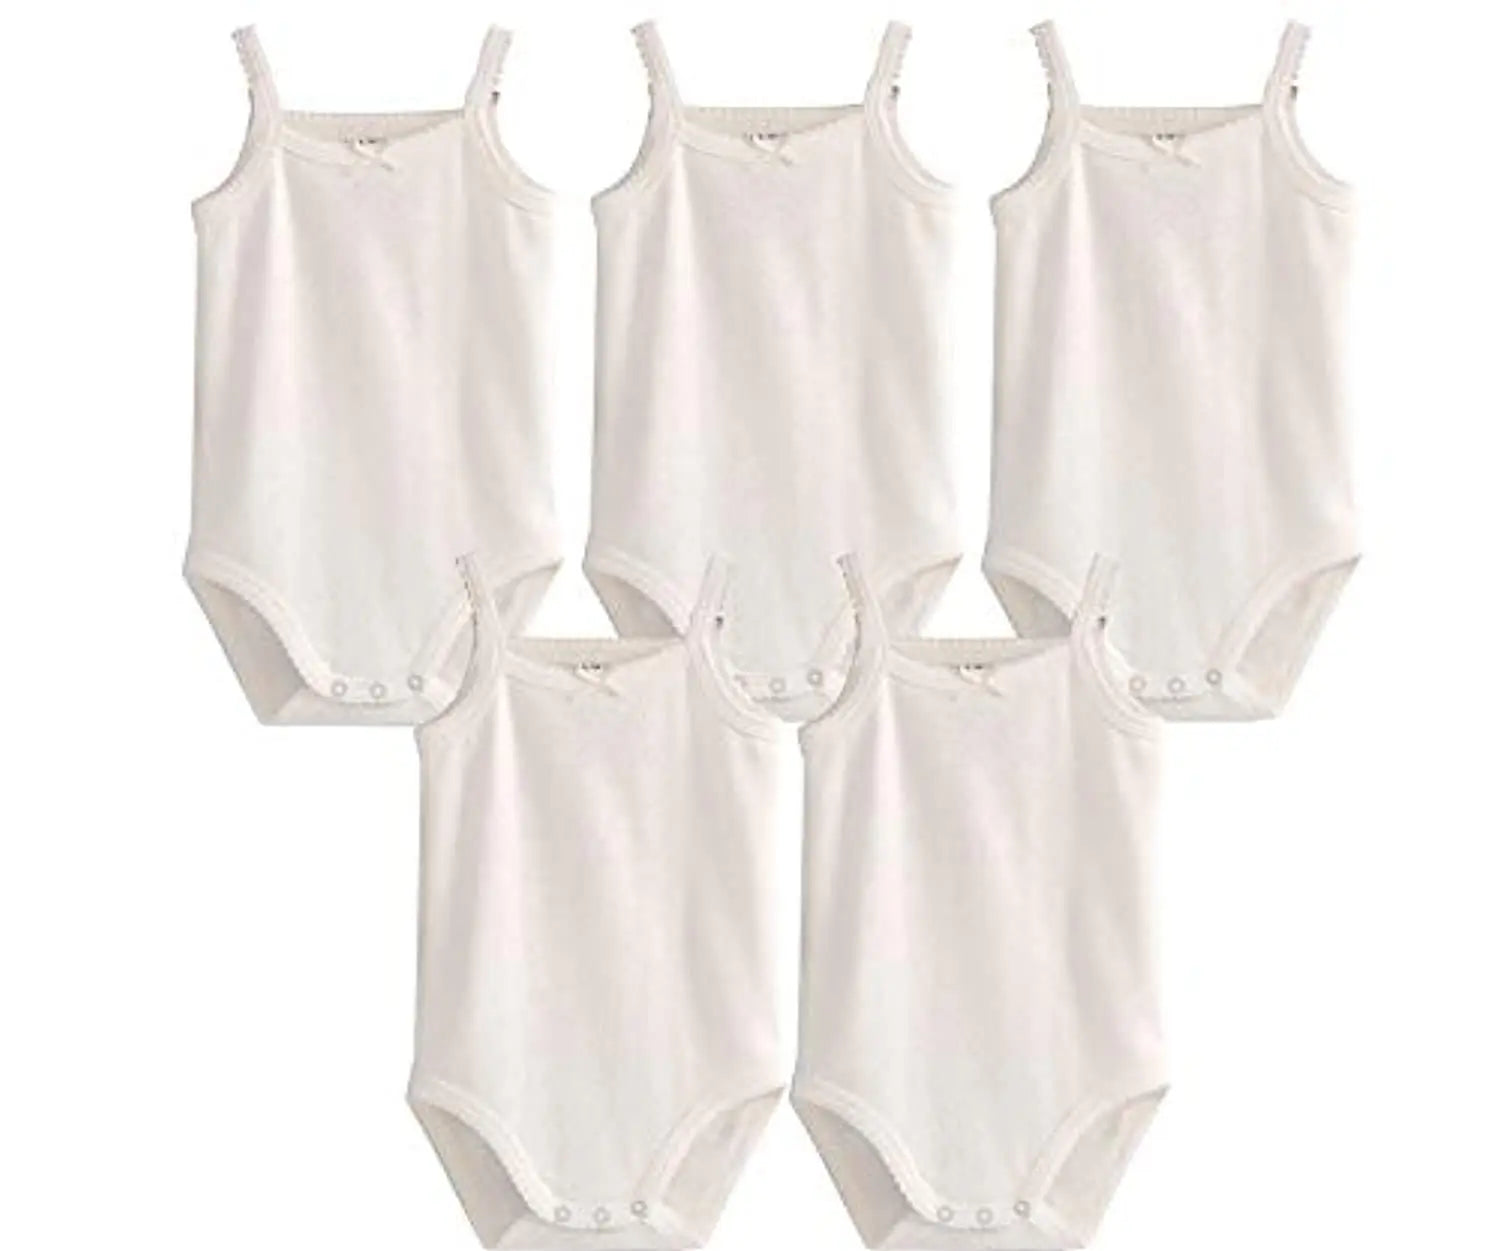 Baby One-Pieces Bodysuits for Newborn Girls Kids Cotton Sleeveless Rompers Toddlers Summer Playsuits White Clothes Outfit 2023